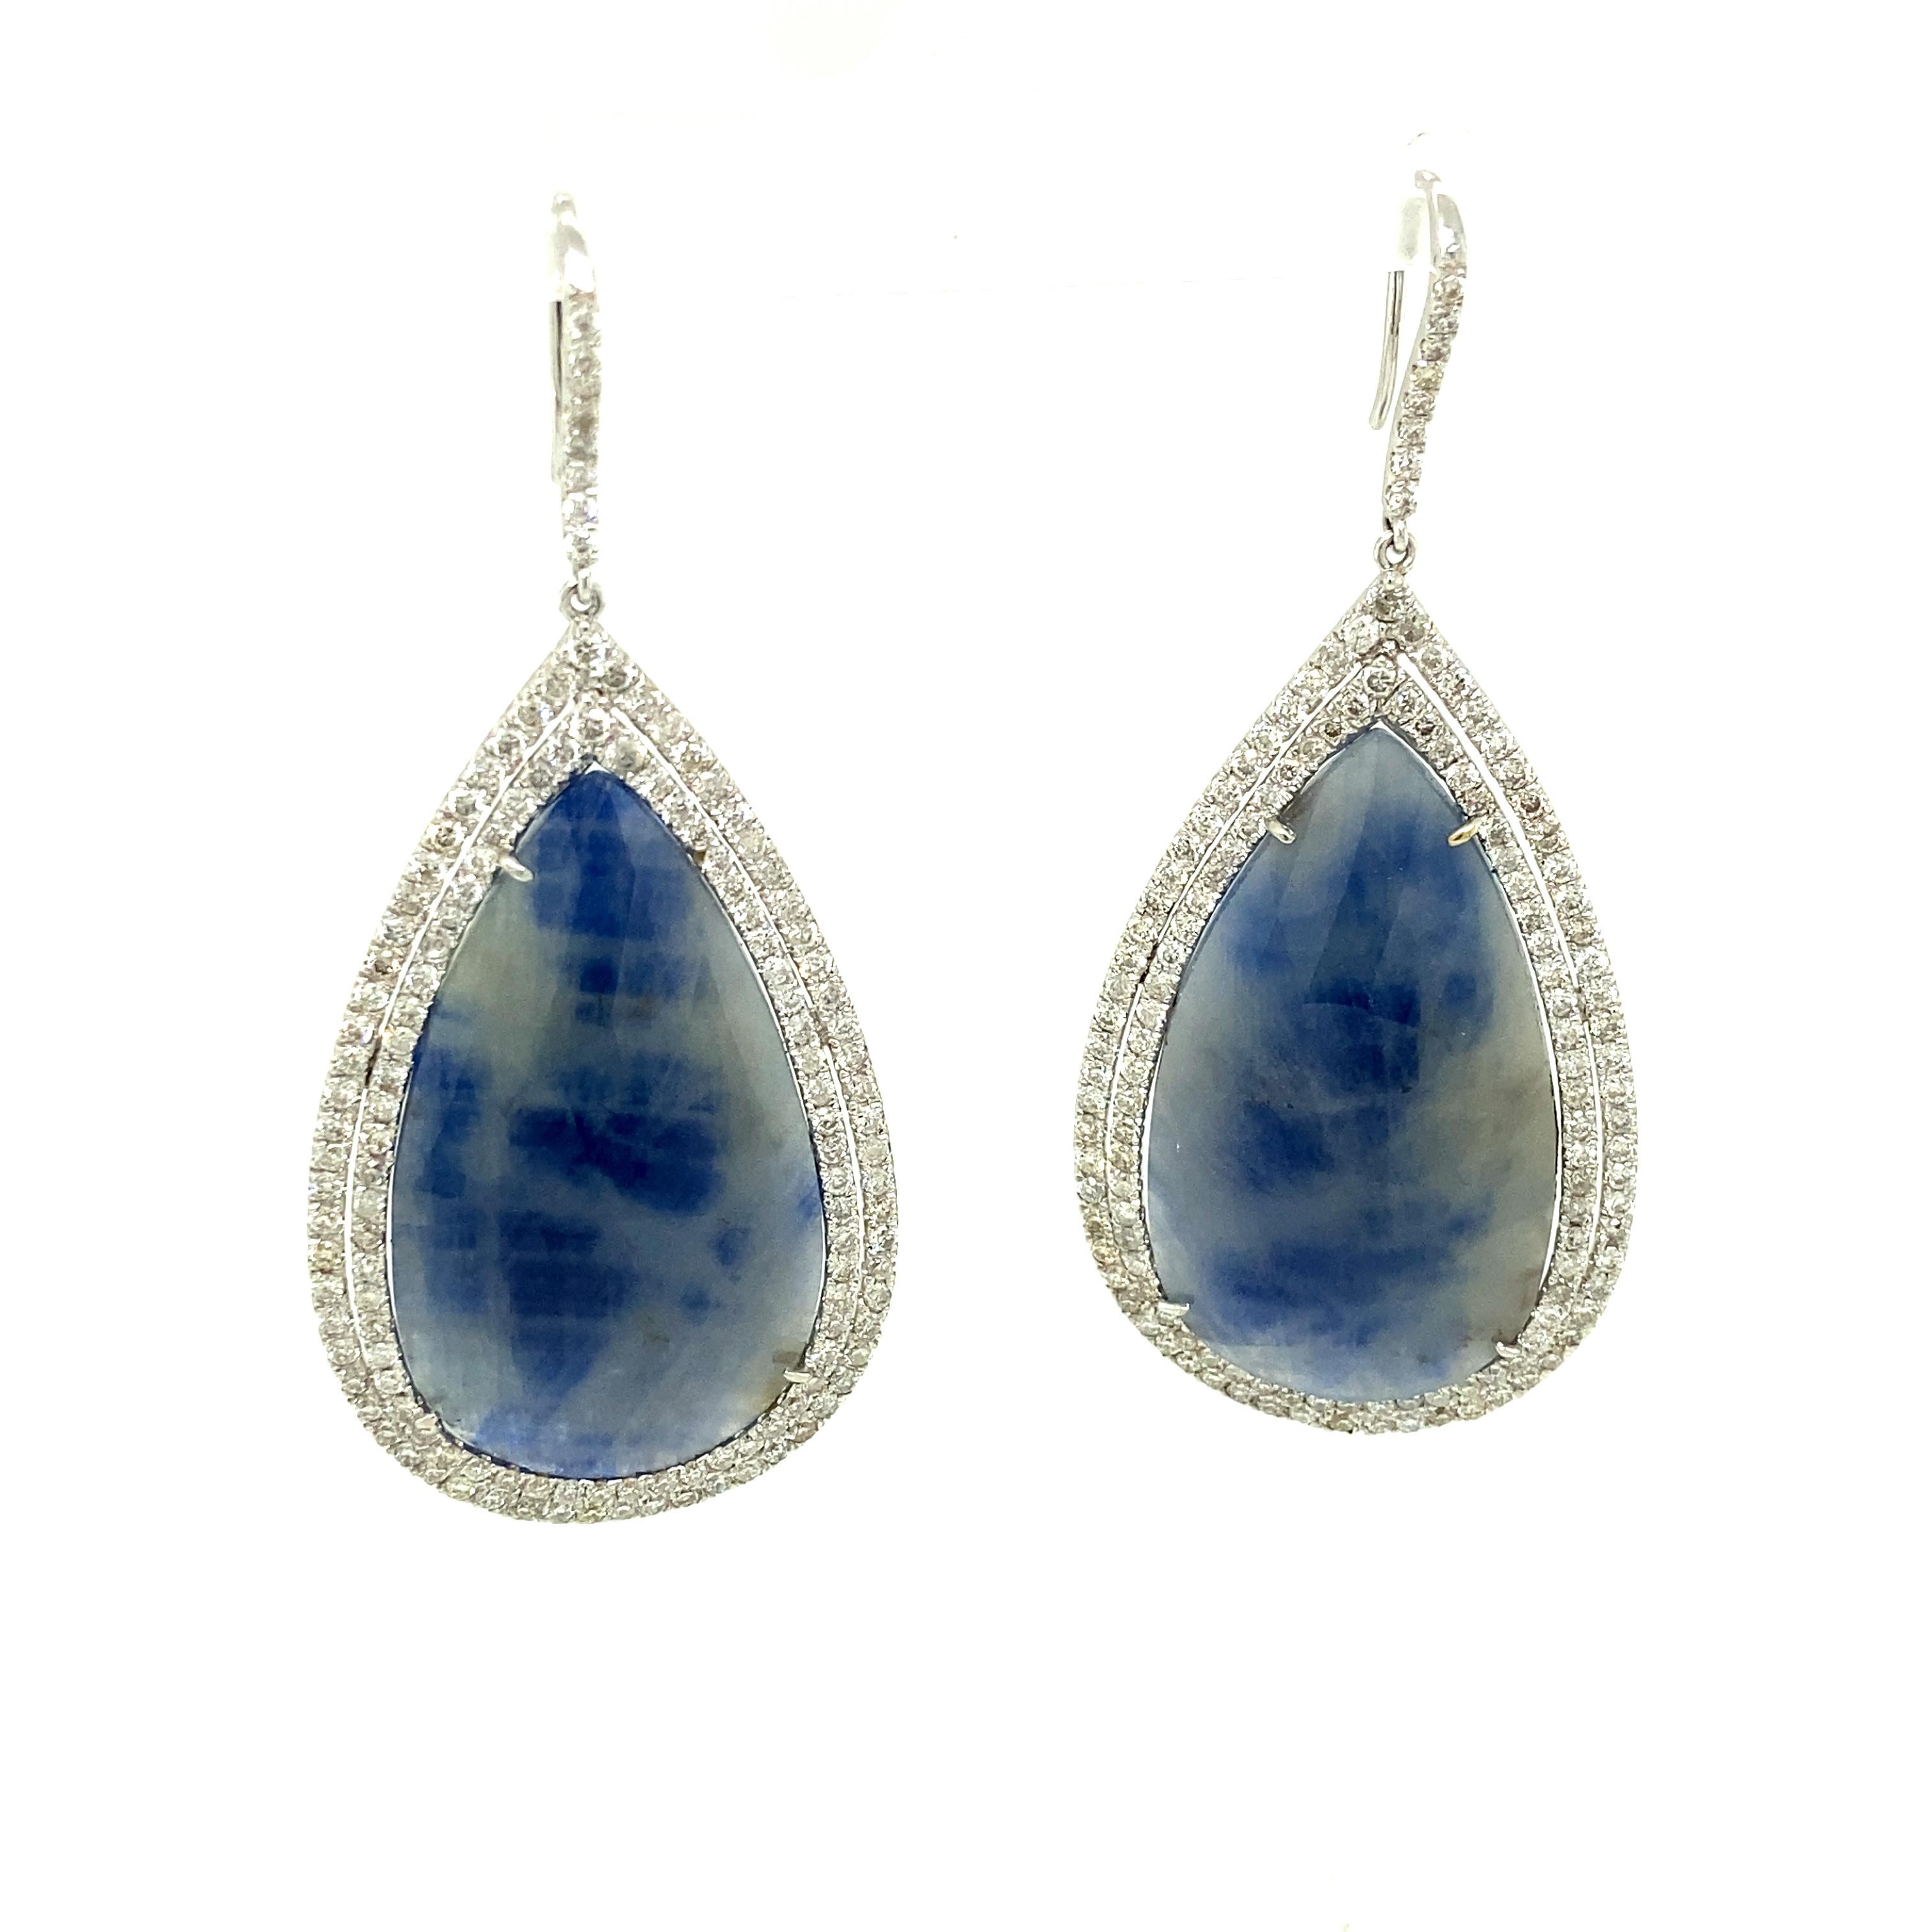 55.84 Carat GRS Certified Unheated White/Blue Sapphire and Diamond Earrings:

An elegant pair of earrings, it features two rose-cut unheated pear shaped blue and white sapphires weighing 55.84 carat along with a halo of white round brilliant